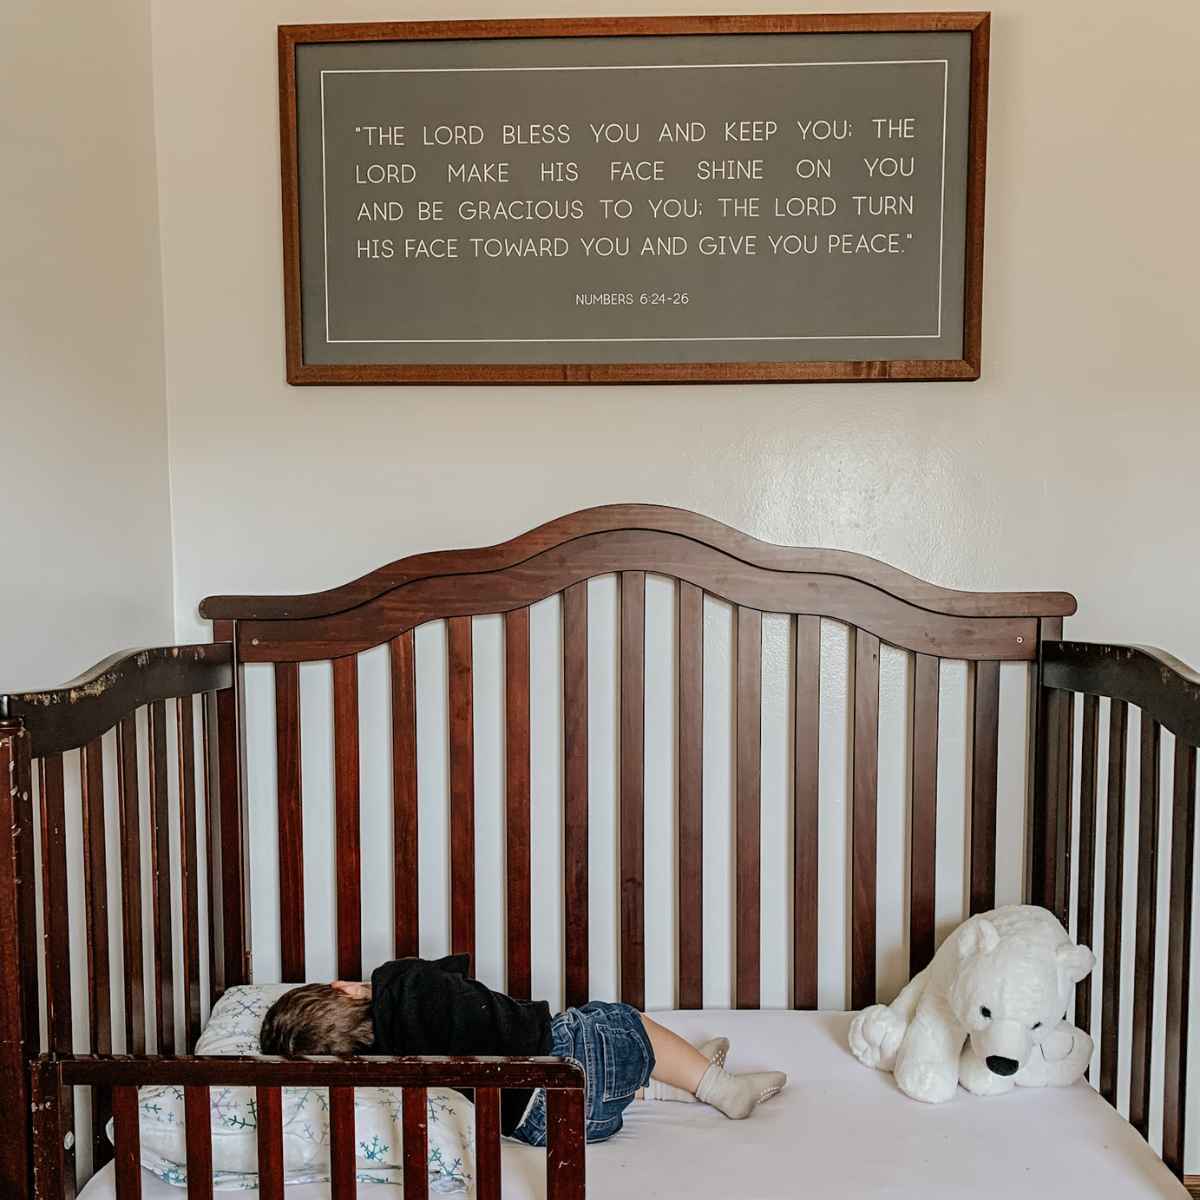 baby boy sleeping in his crib with the verses form numbers 6:24-26 framed above his crib.